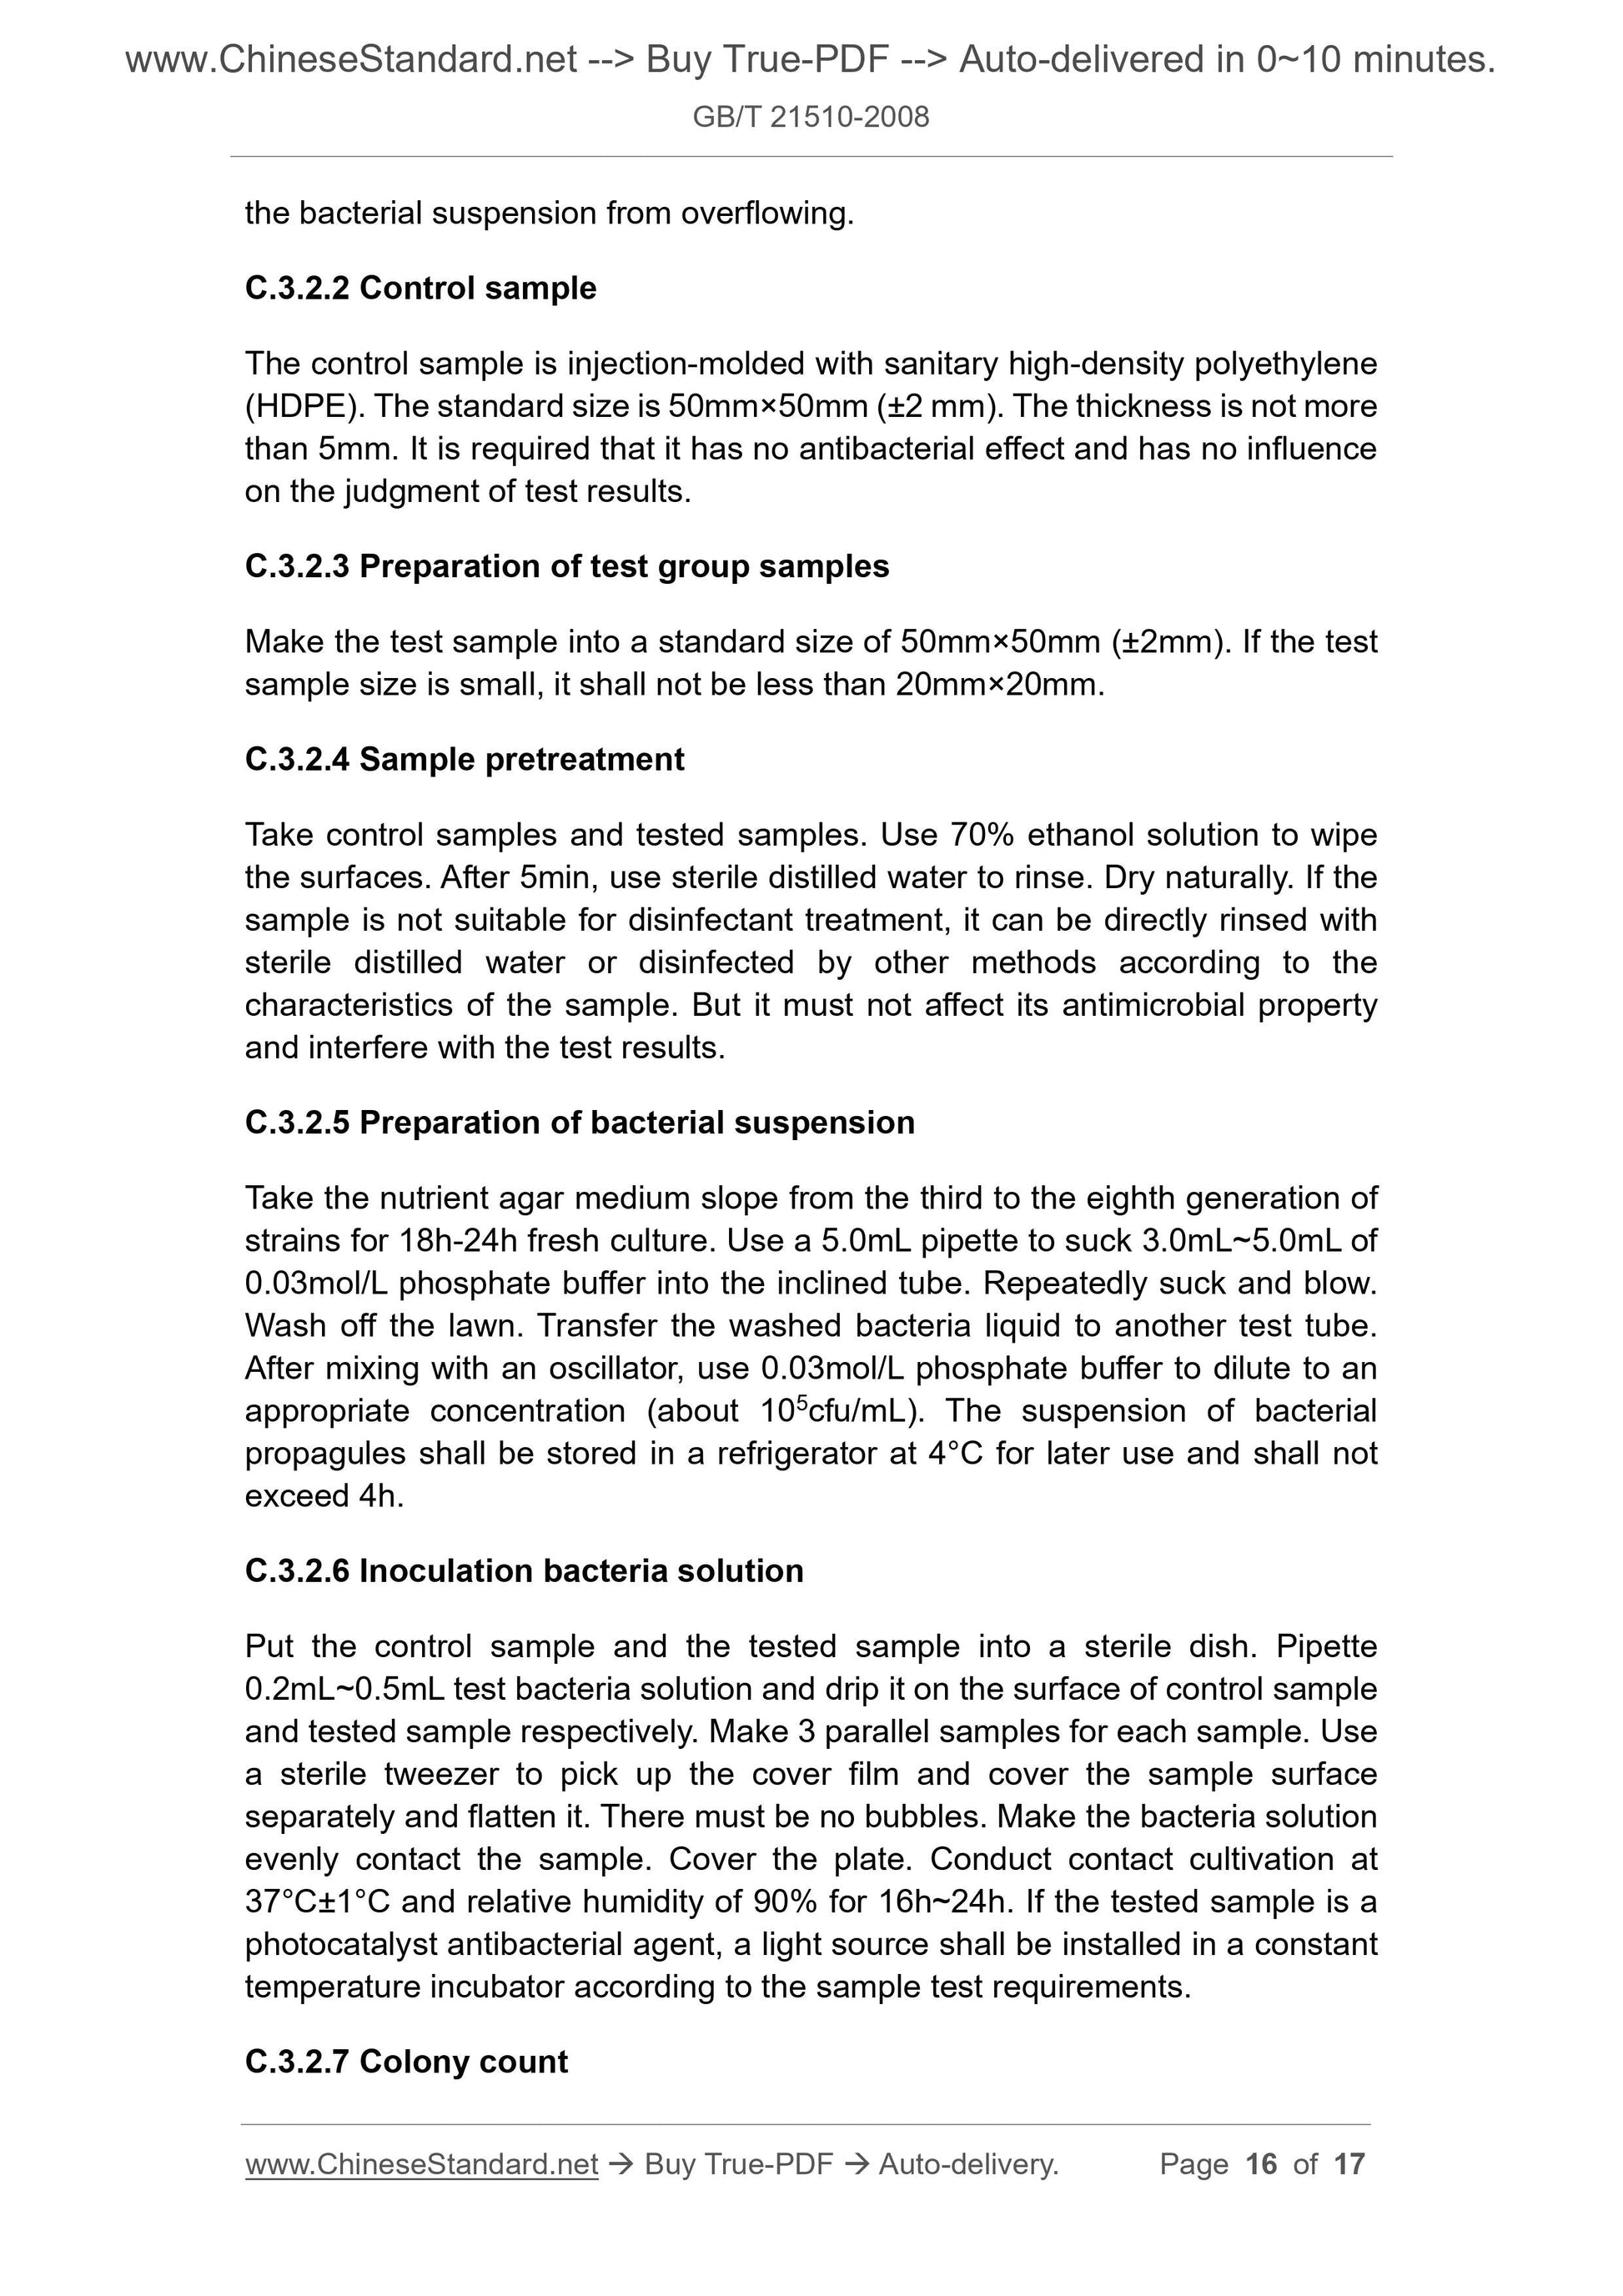 GB/T 21510-2008 Page 8